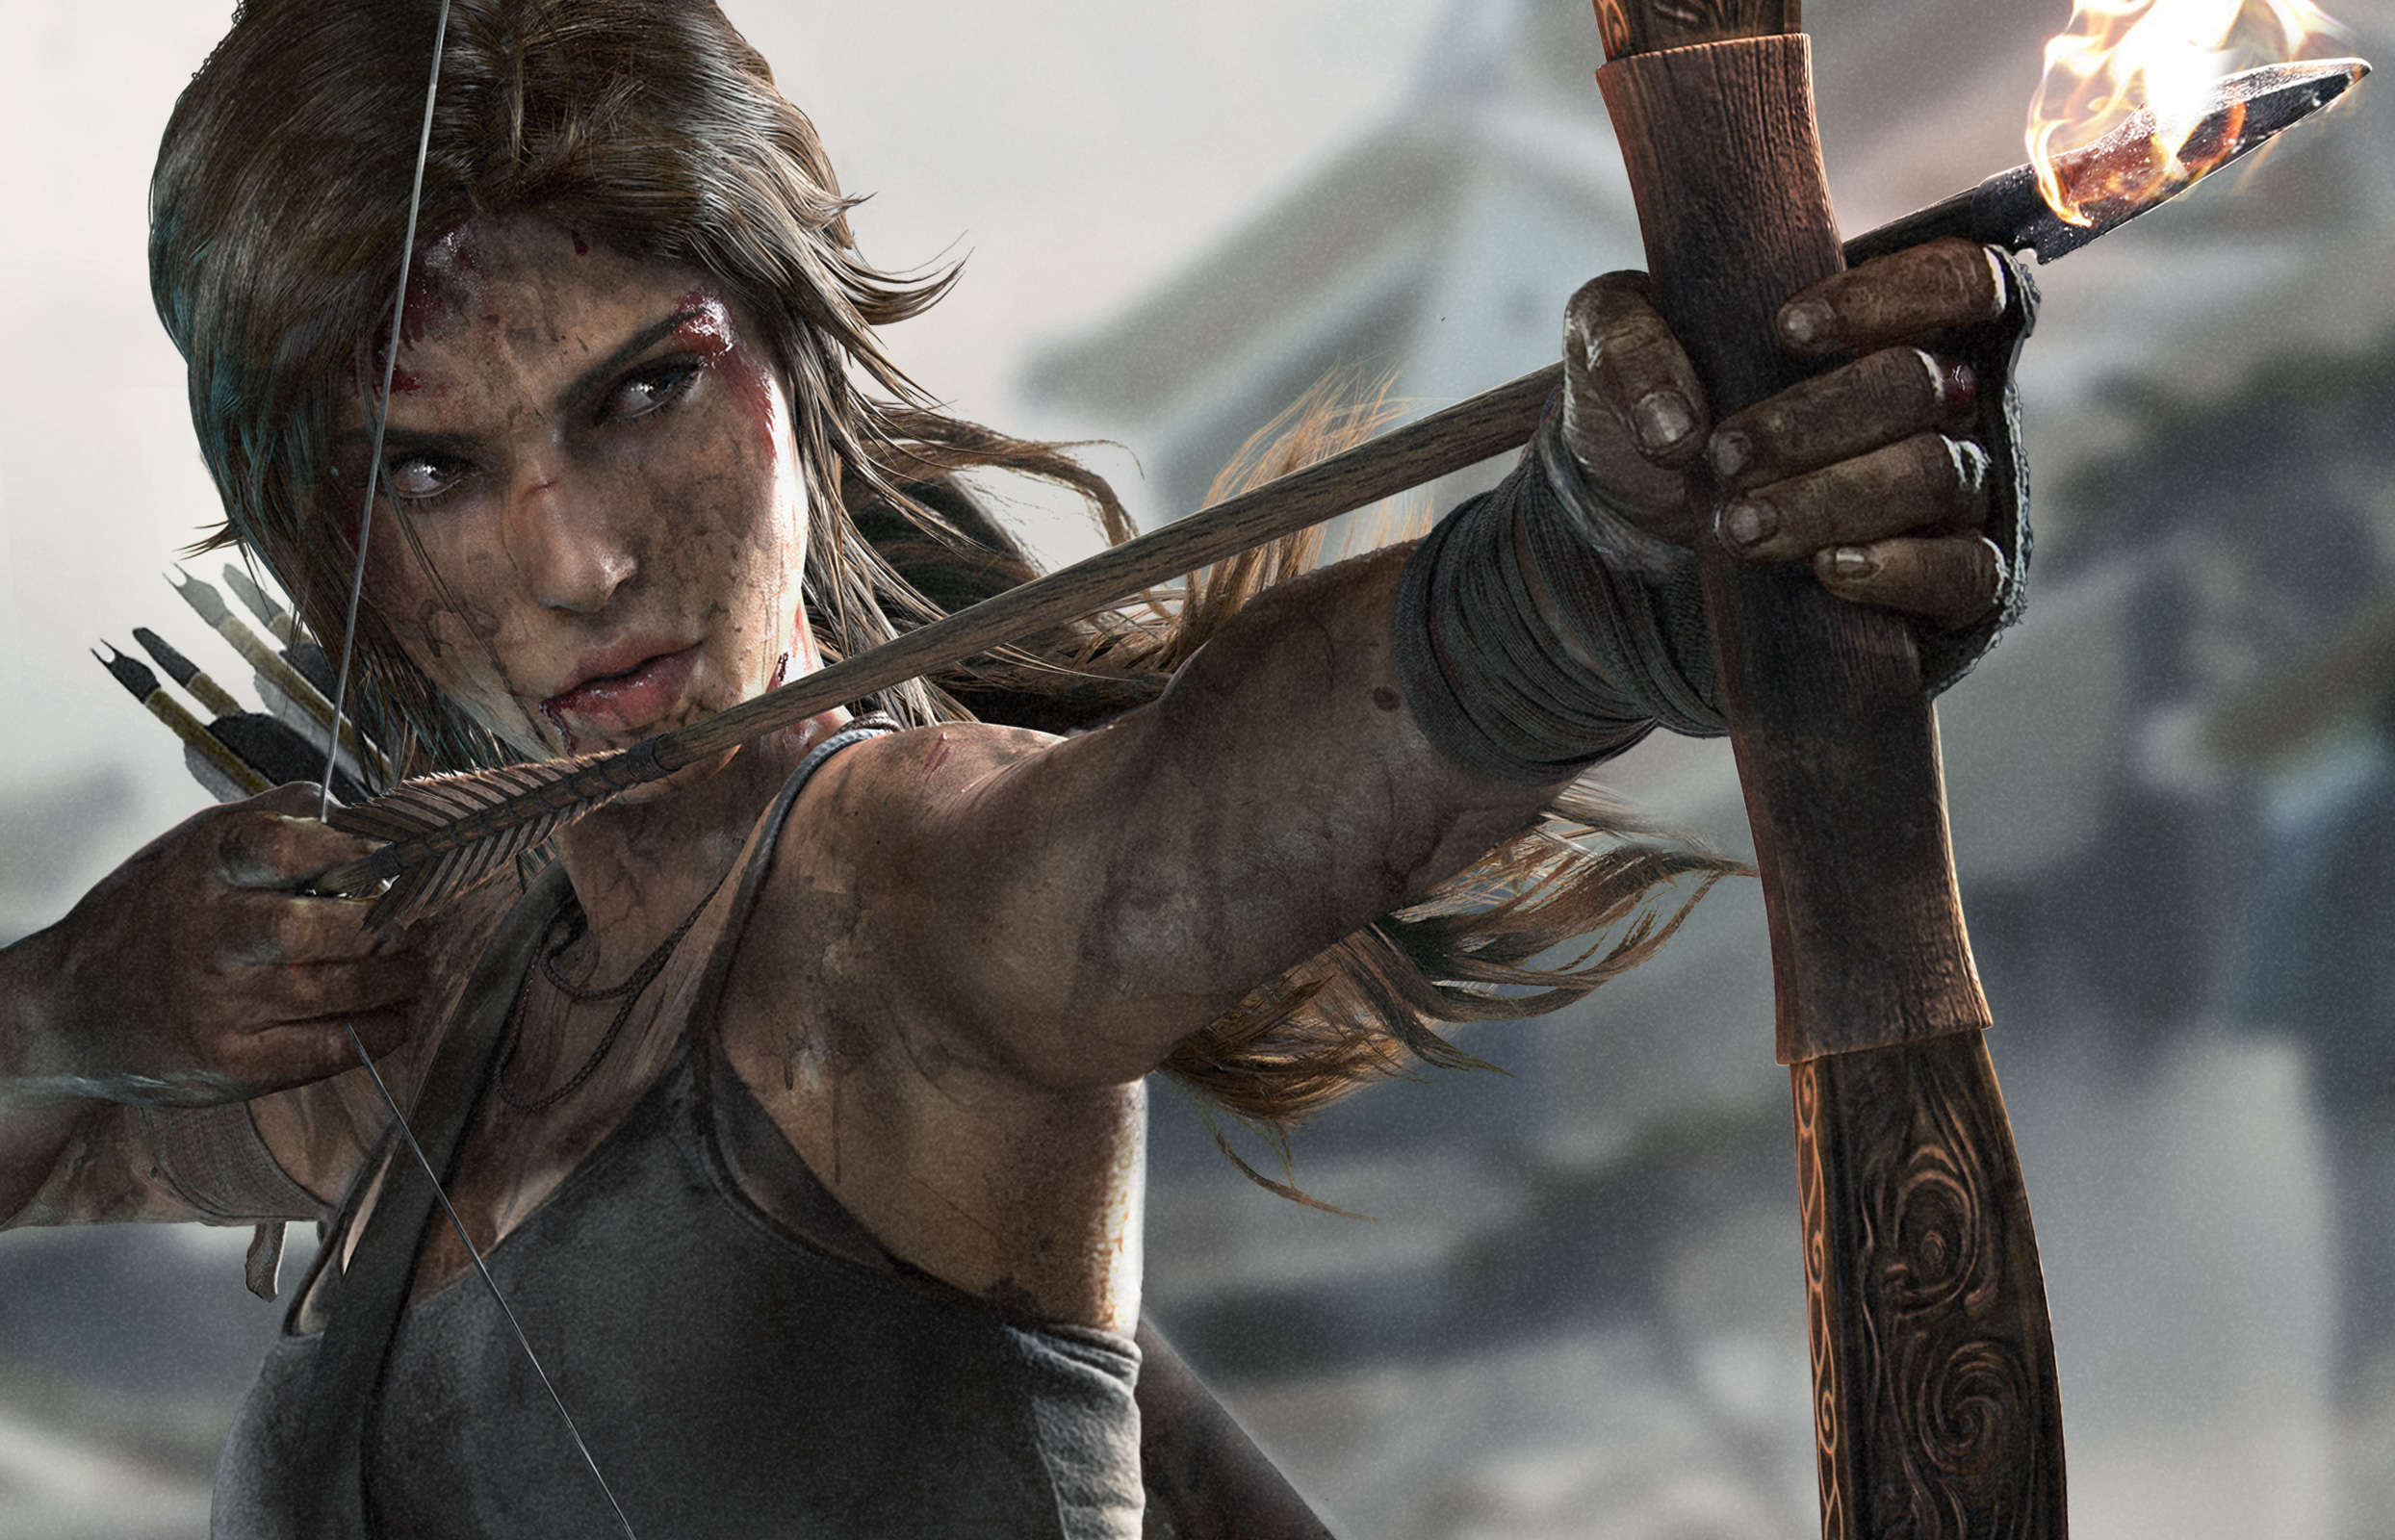 Lara Croft is a Japanese game character? AI thinks so